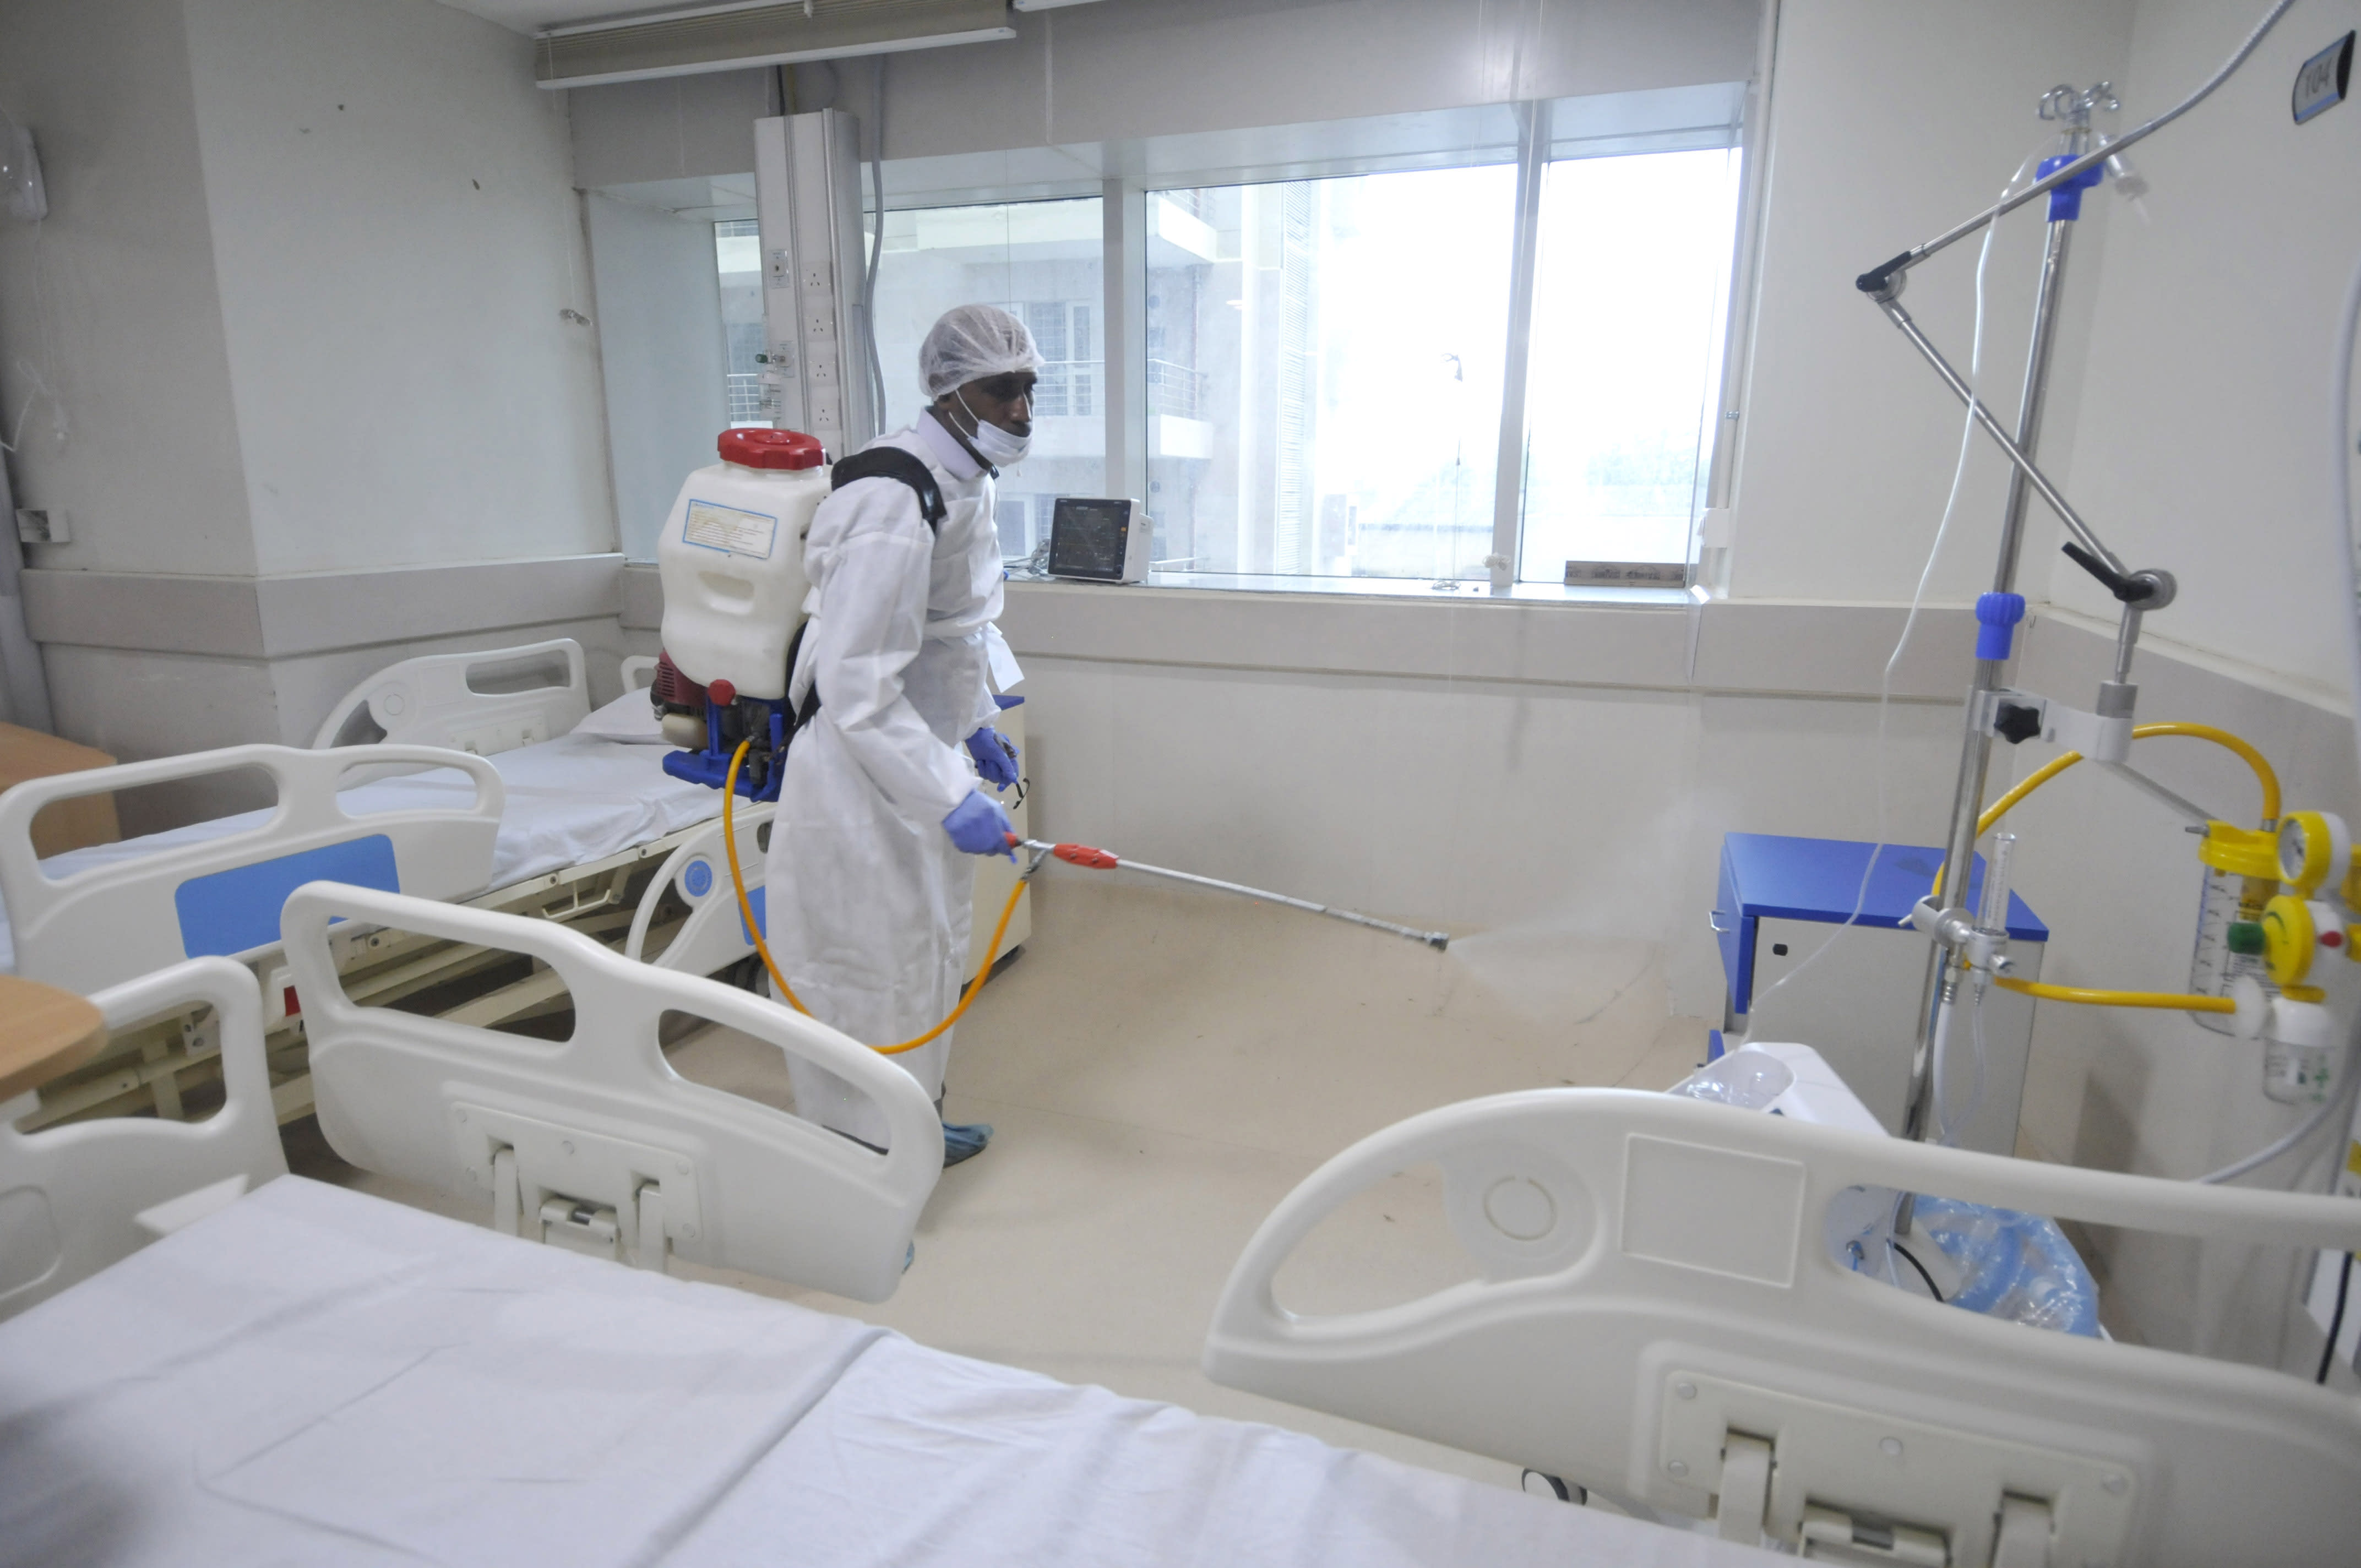 Routine Cleaning And Disinfection Leaves No Trace Of Coronavirus On Hospital Clinic Surfaces Study Finds The Bharat Express News